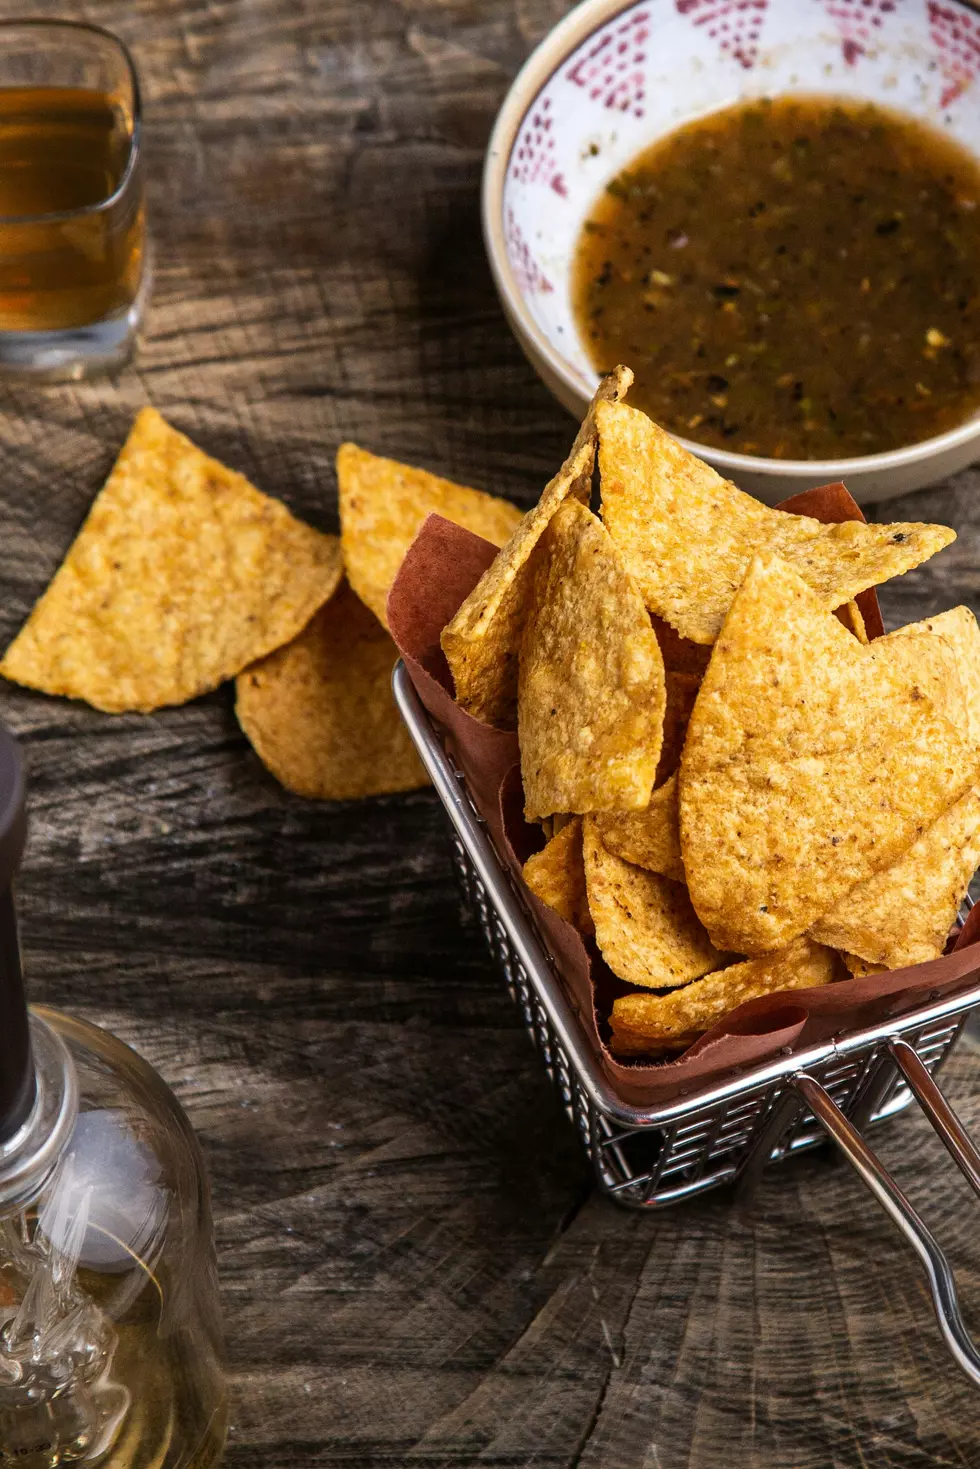 5 Restaurants In Midland-Odessa To Hit Up For The Chips And Salsa!